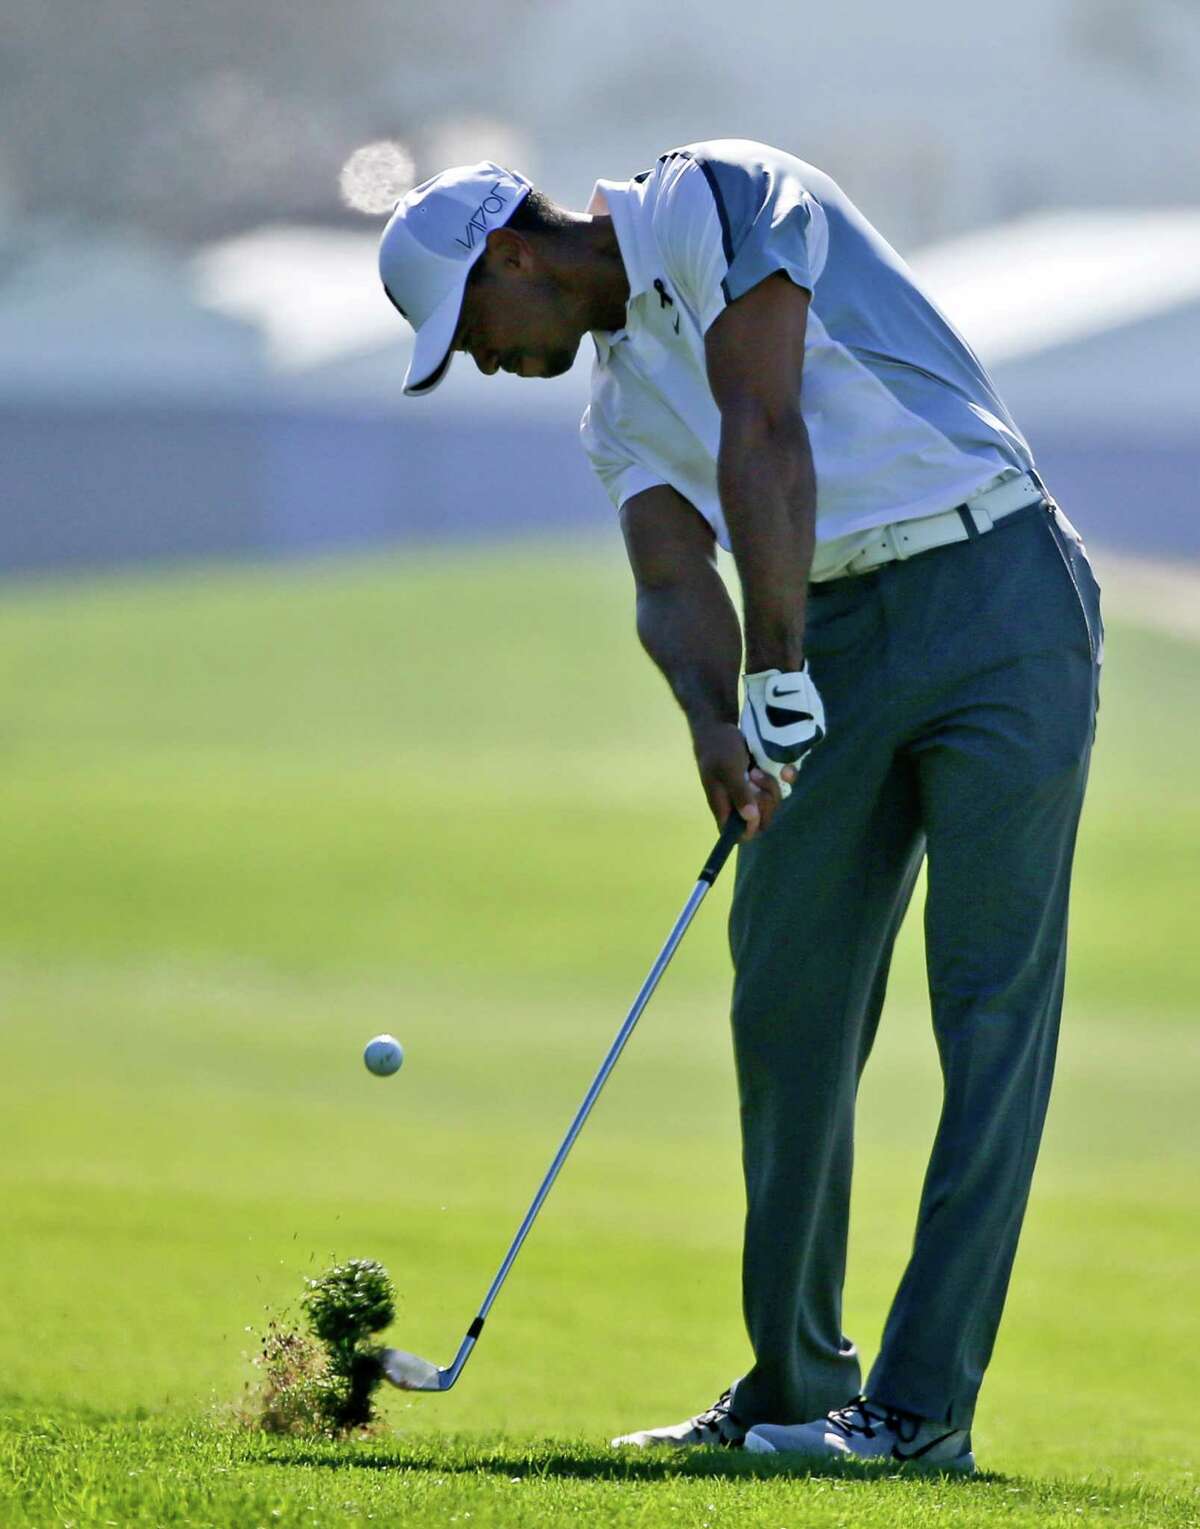 Tiger Woods hits his approach shot to the 10th hole (his first) on the north course at Torrey Pines during the first round of the Farmers Insurance Open golf tournament Thursday, Feb. 5, 2015, in San Diego. Woods missed the green with the short shot and made bogie. (AP Photo/Lenny Ignelzi) ORG XMIT: CALI105